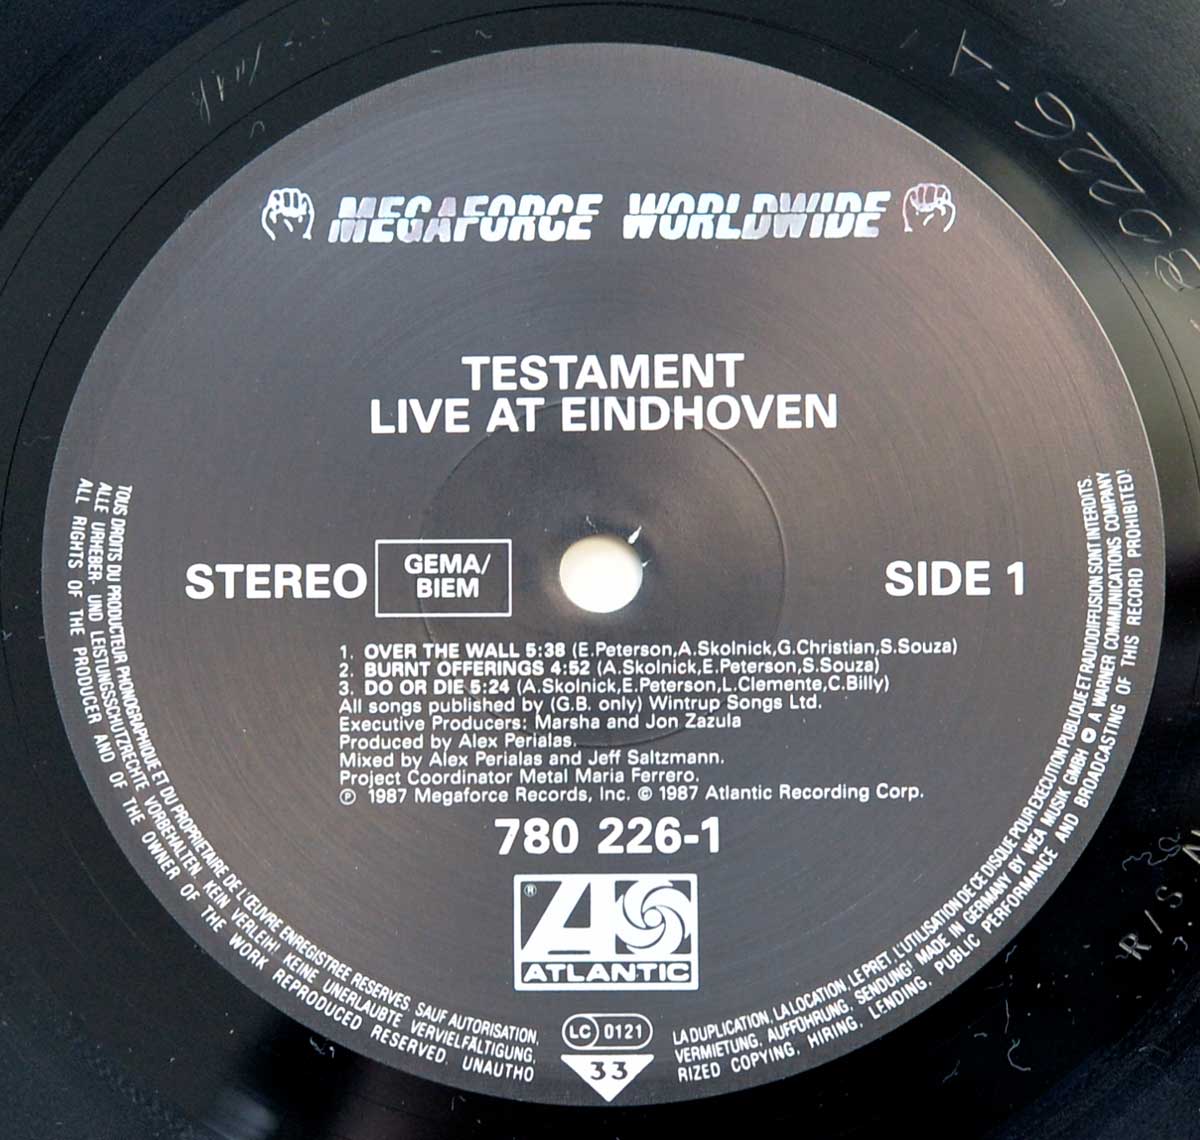 Enlarged & Zoomed photo of "TESTAMENT Live at Eindhoven" Record's Label